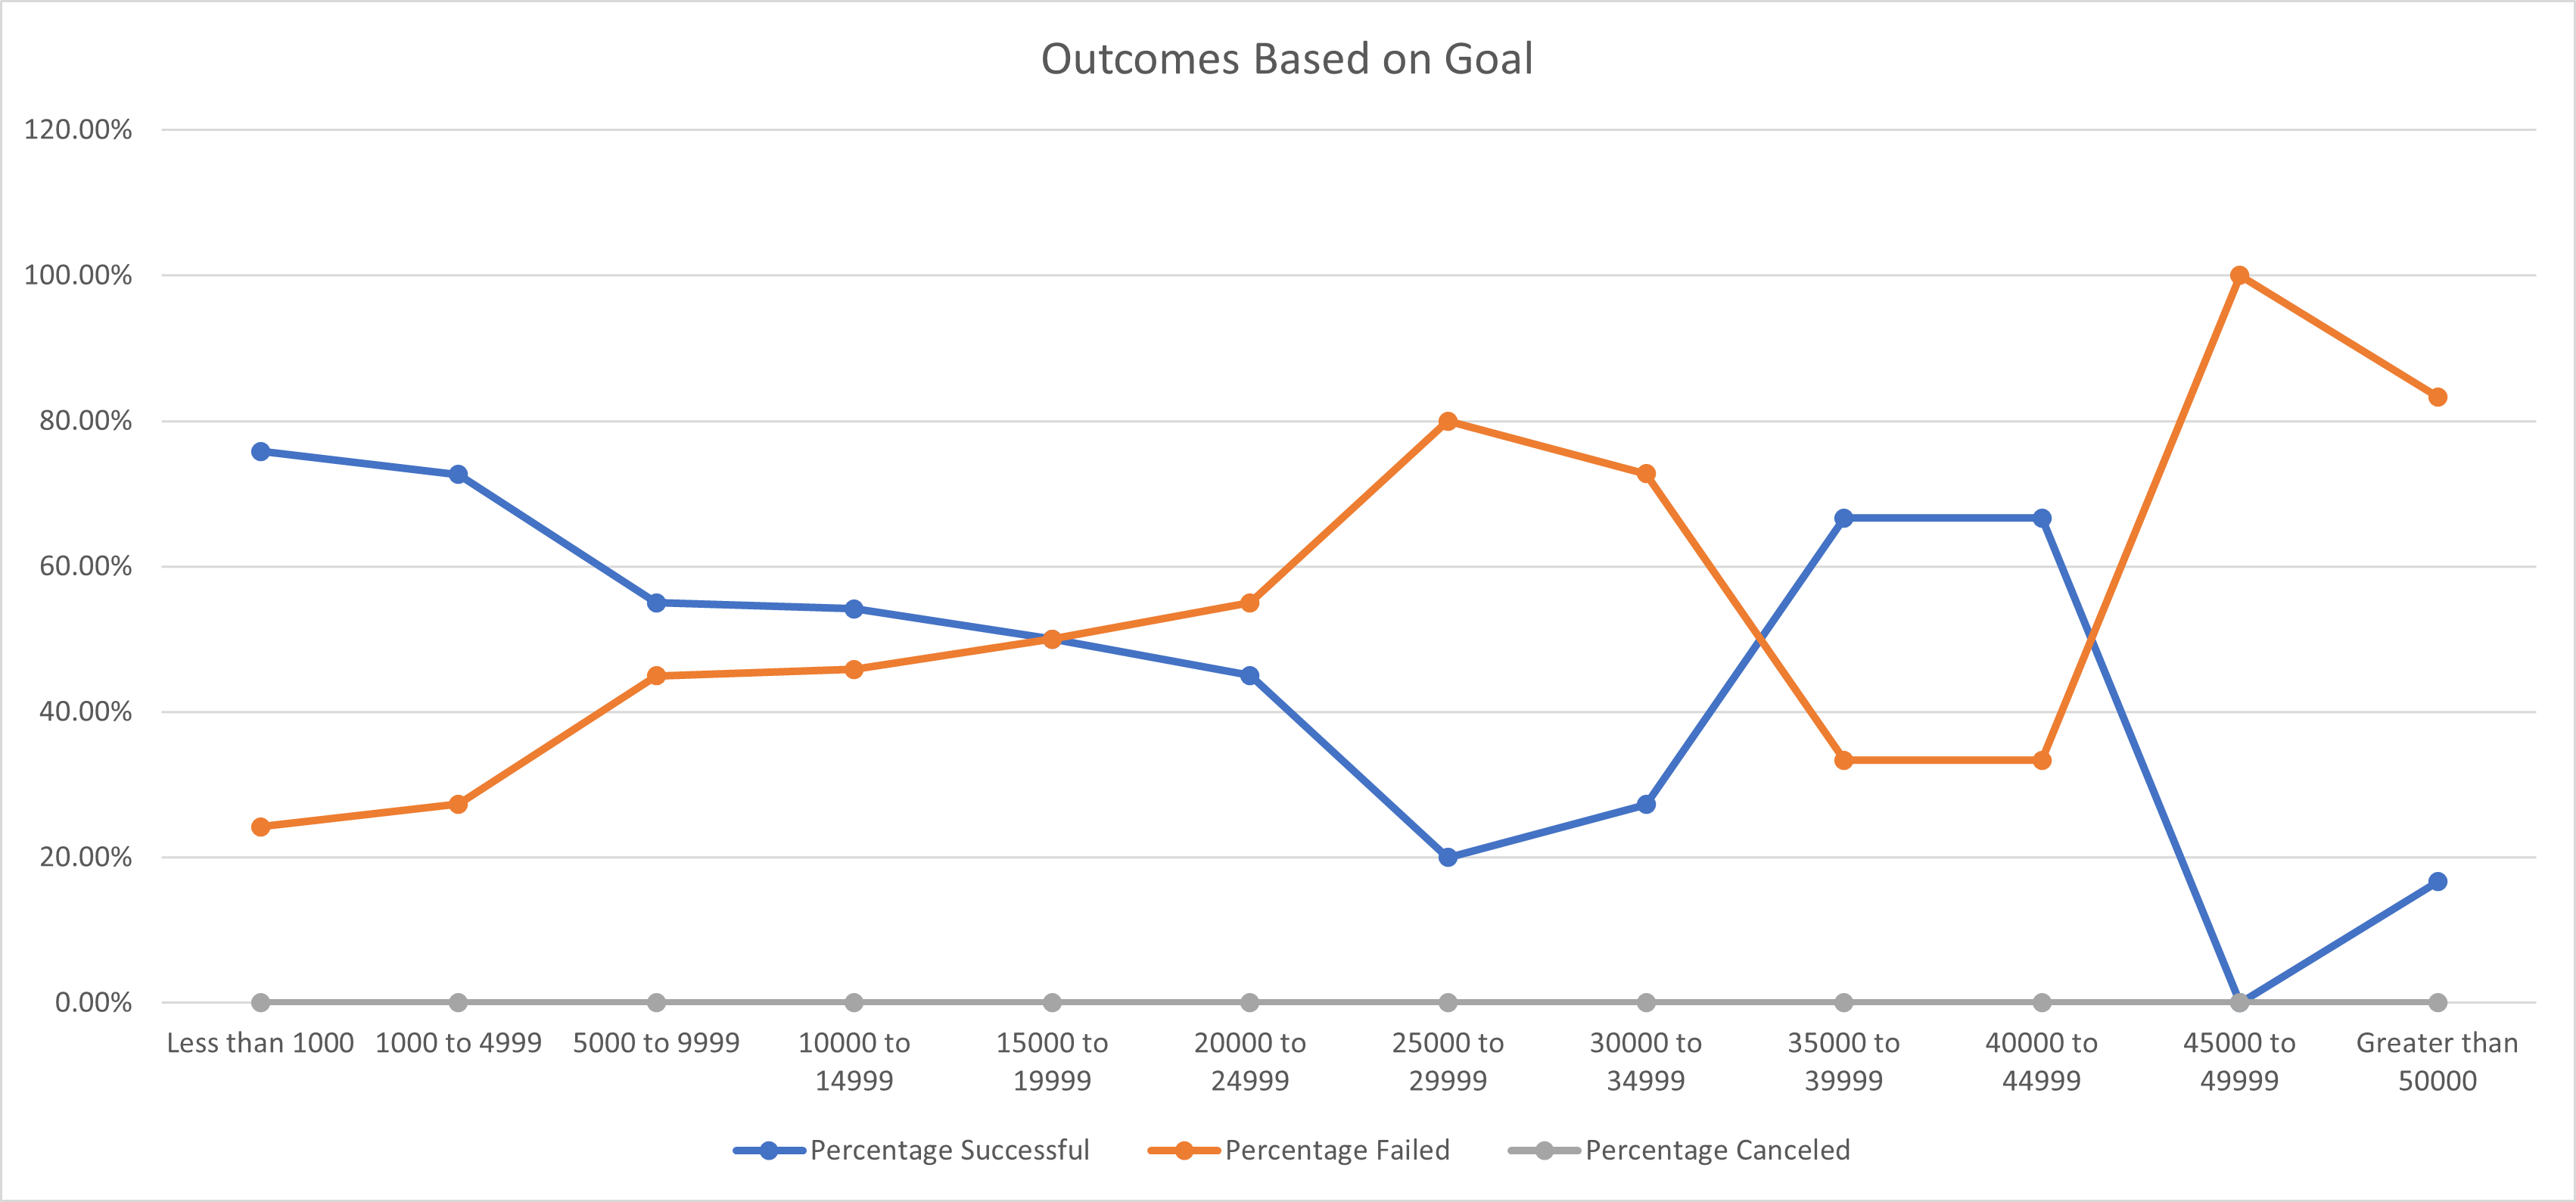 Analysis of Outcomes Based on Goals